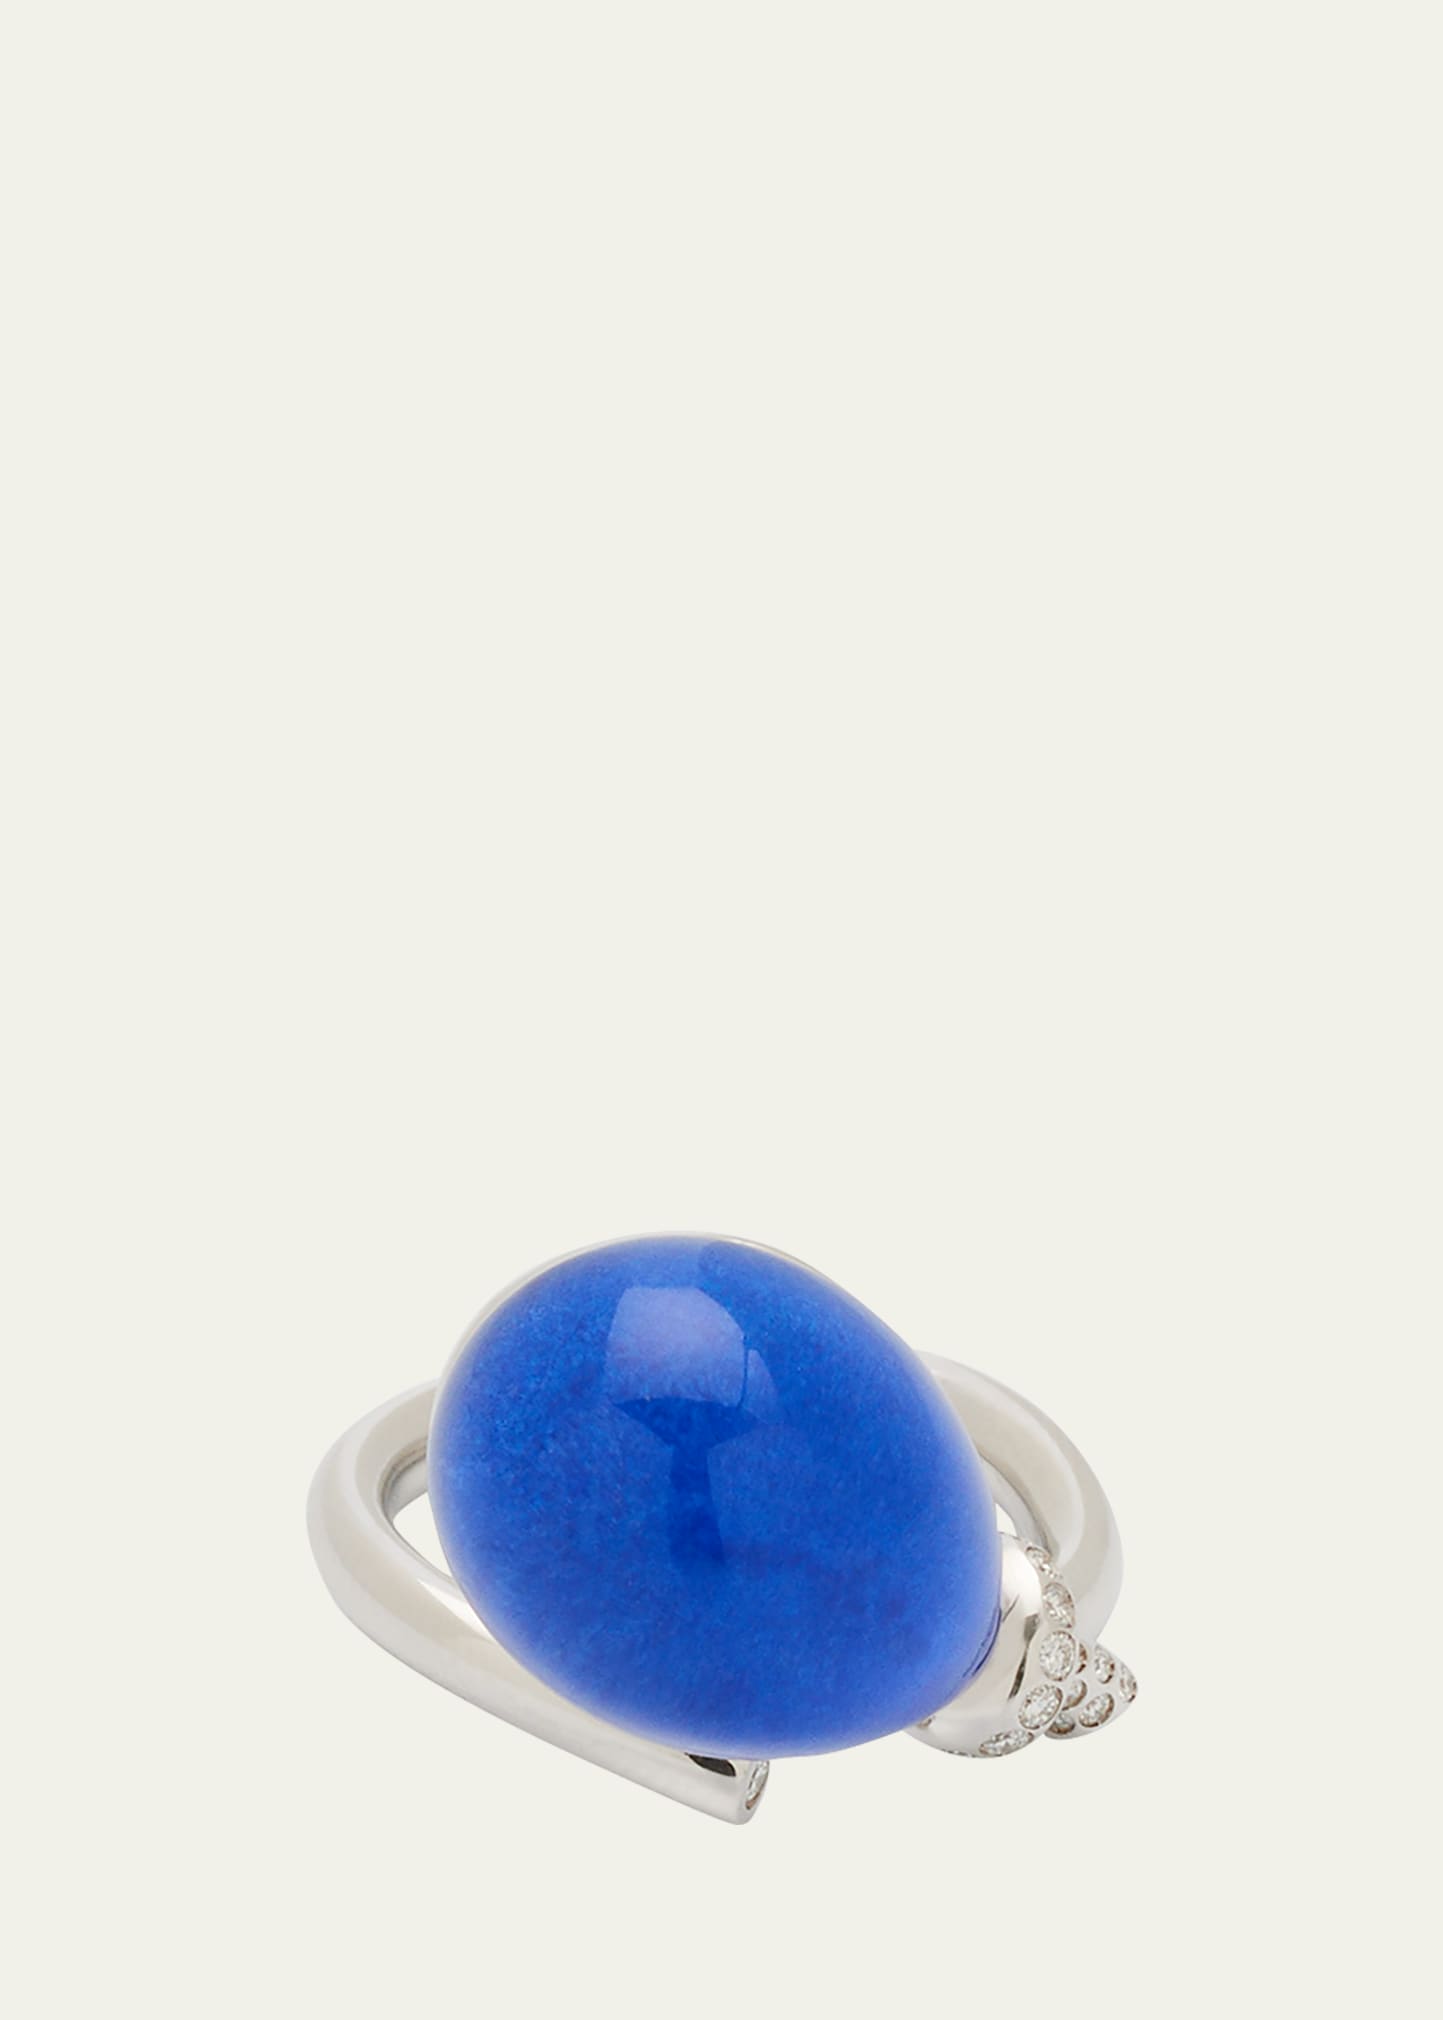 Palloncini Mini Ring in White Gold Diamonds, Rock Crystal and Lapis